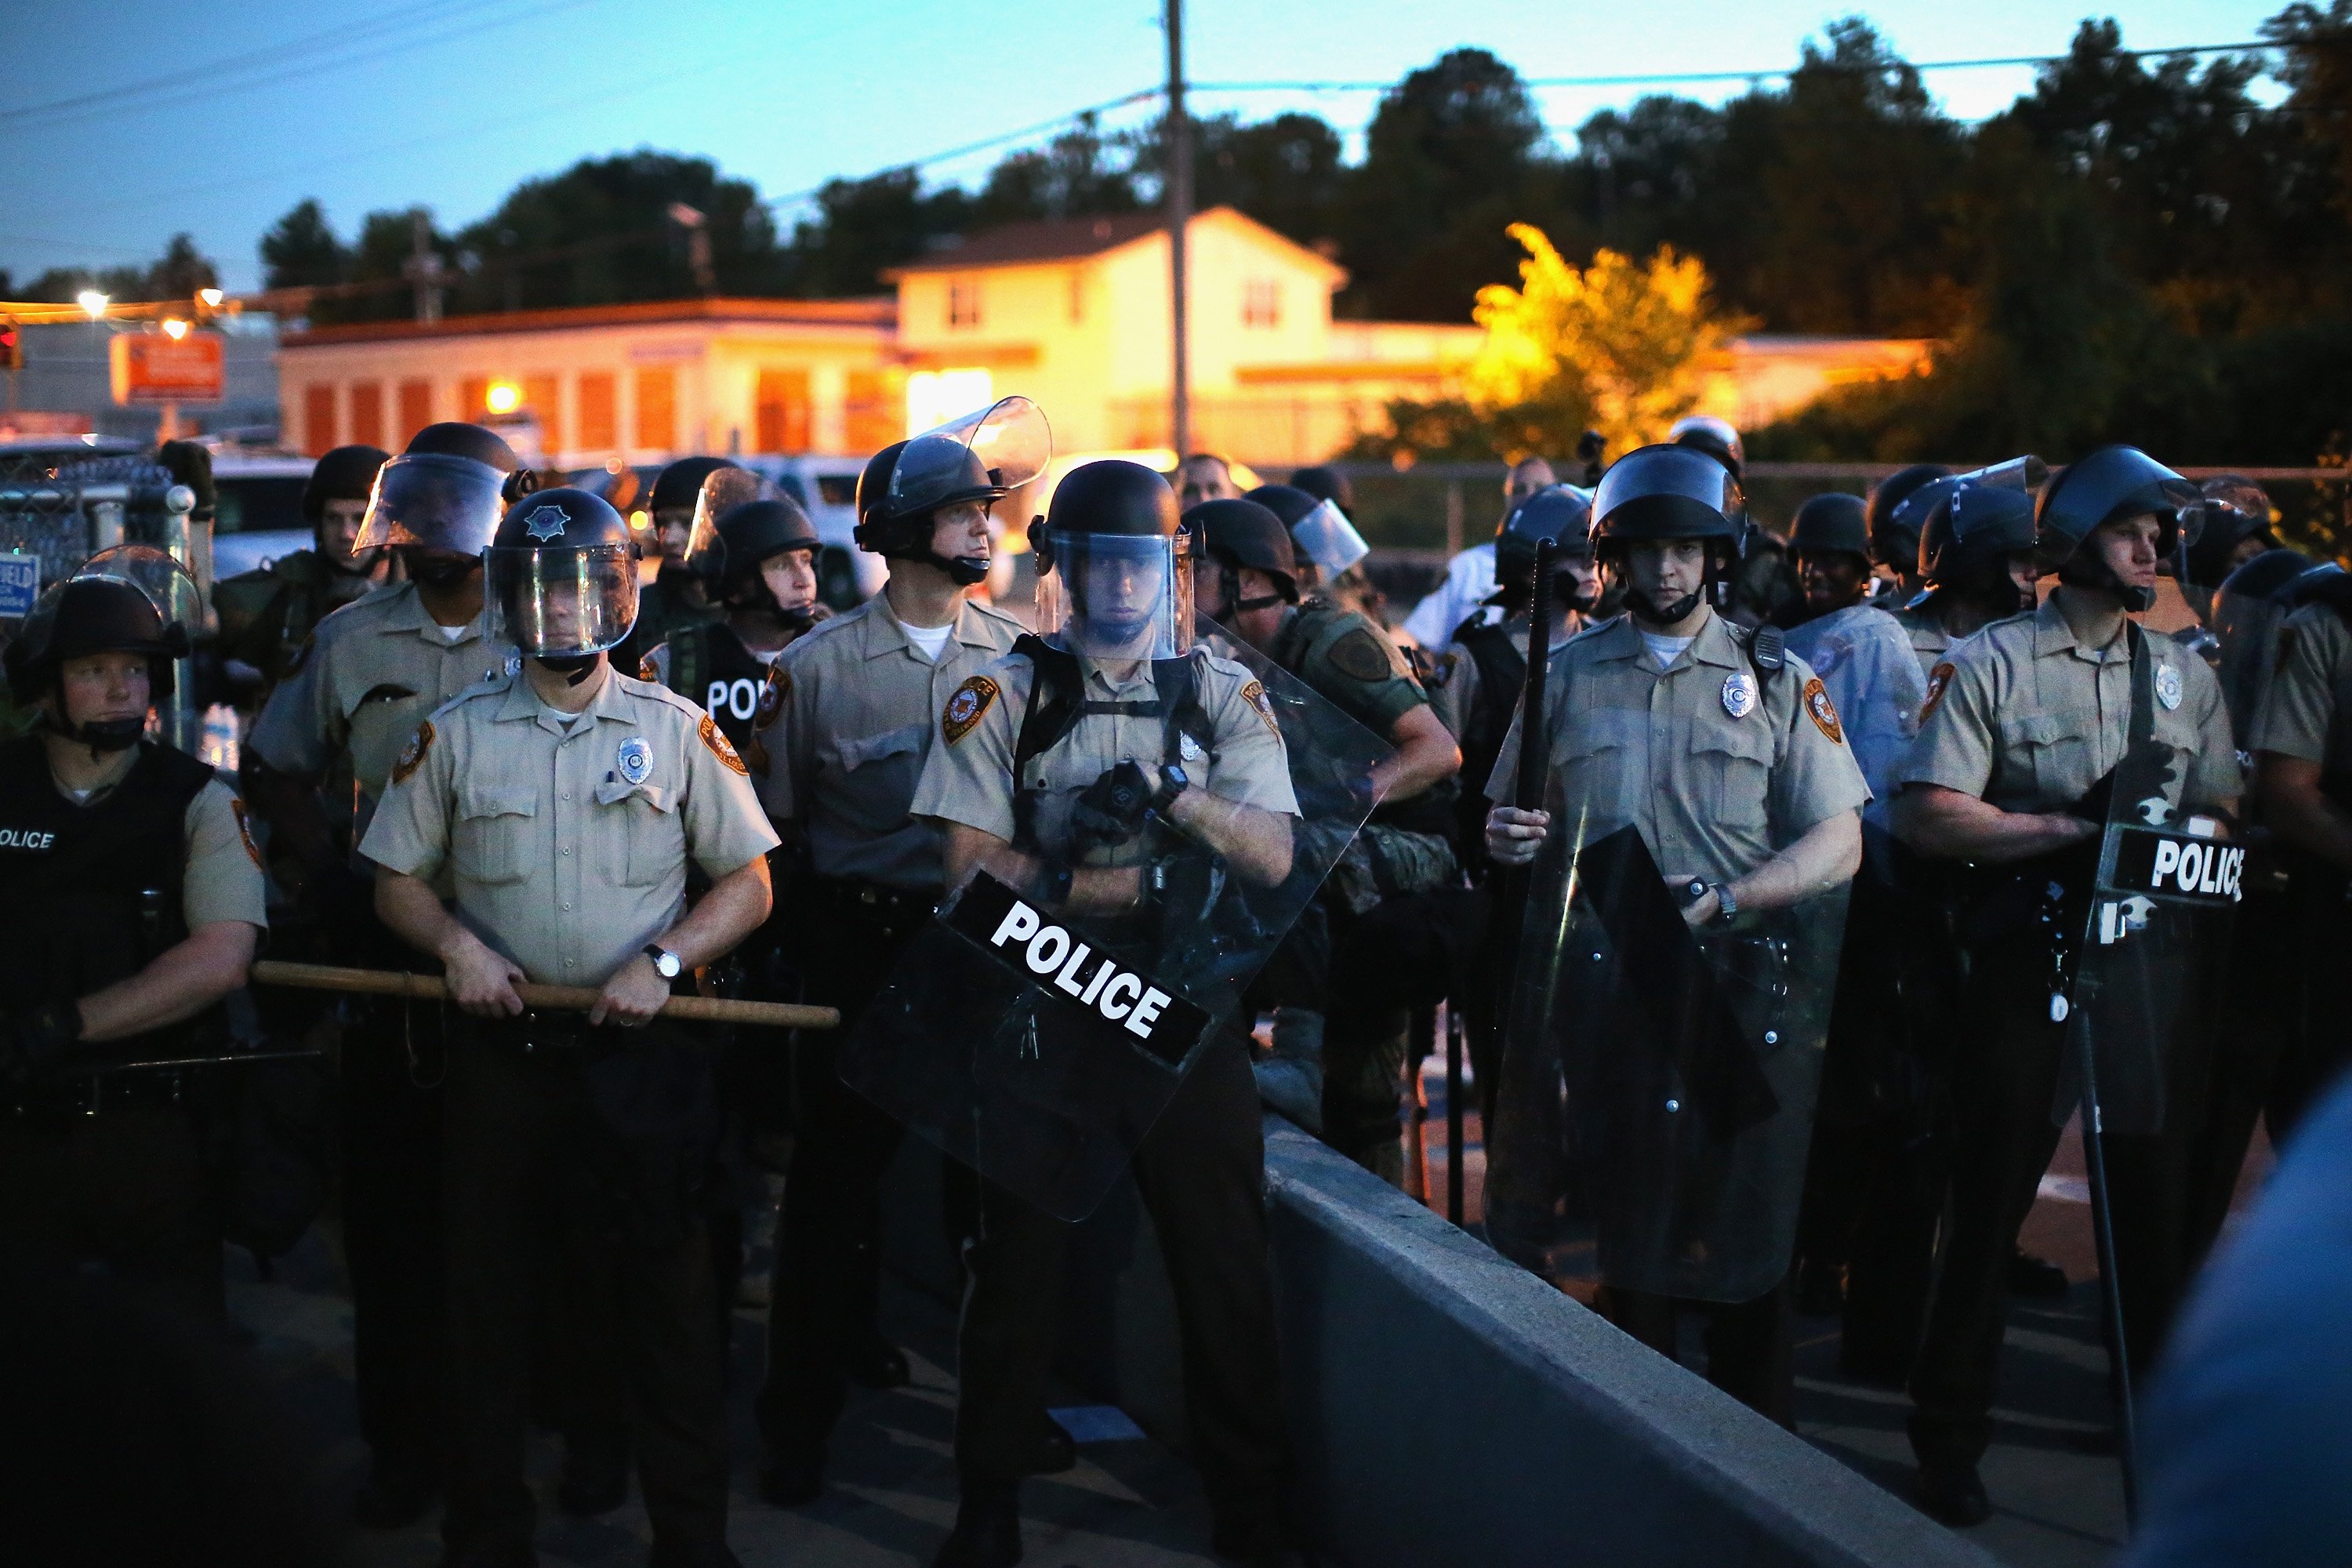 Police stand watch as demonstrators protest the shooting death of teenager Michael Brown in Ferguson, Mo. on Aug. 13, 2014. (Scott Olson—Getty Images)